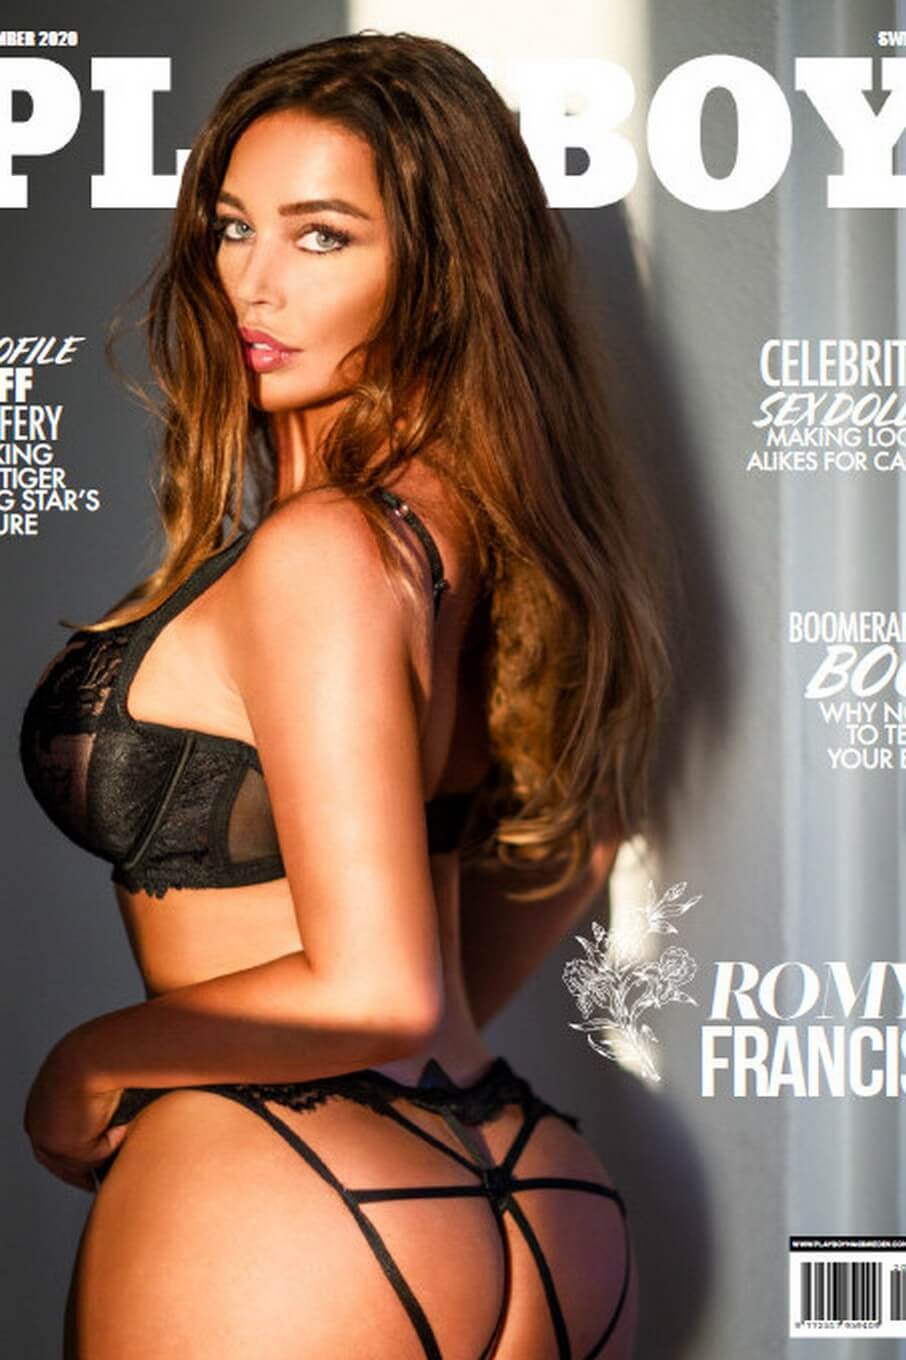 Playboy magazine Sweden Sept 20 issue-with busty cover girl (5 photos) · Pandesia World